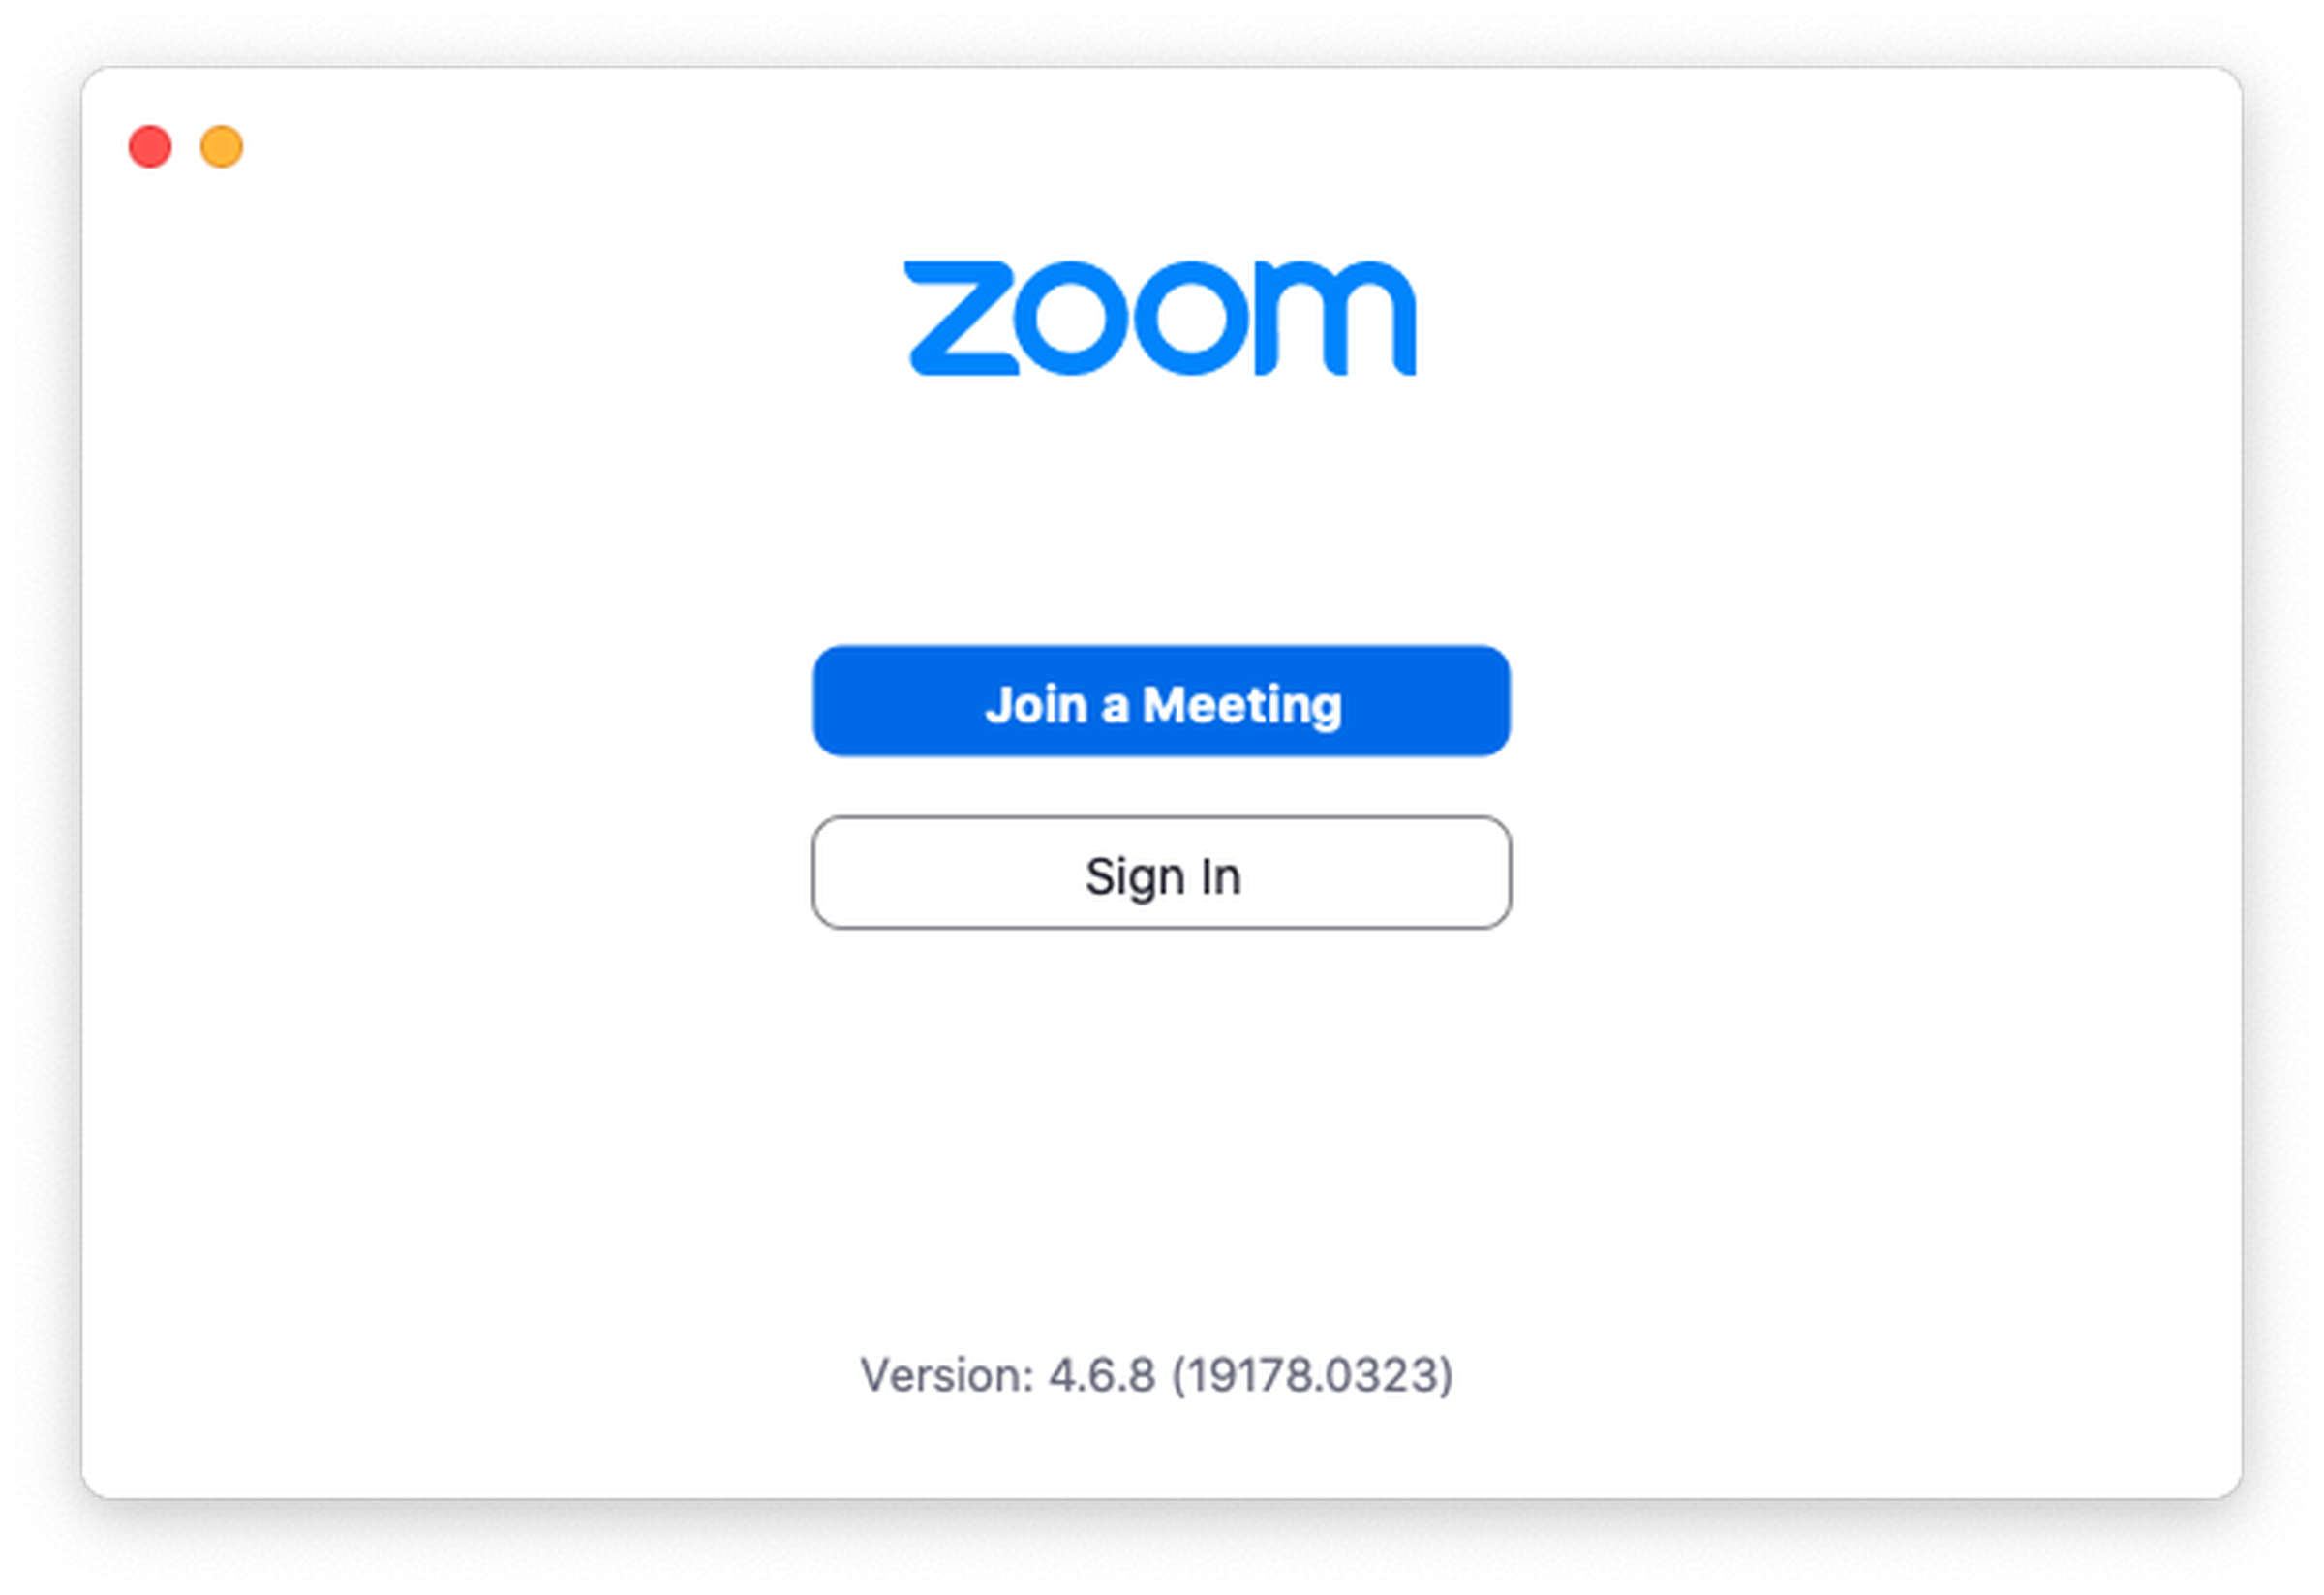 After you’ve installed the Zoom app, you’ll see buttons to “Join a Meeting” or “Sign In.”&nbsp;